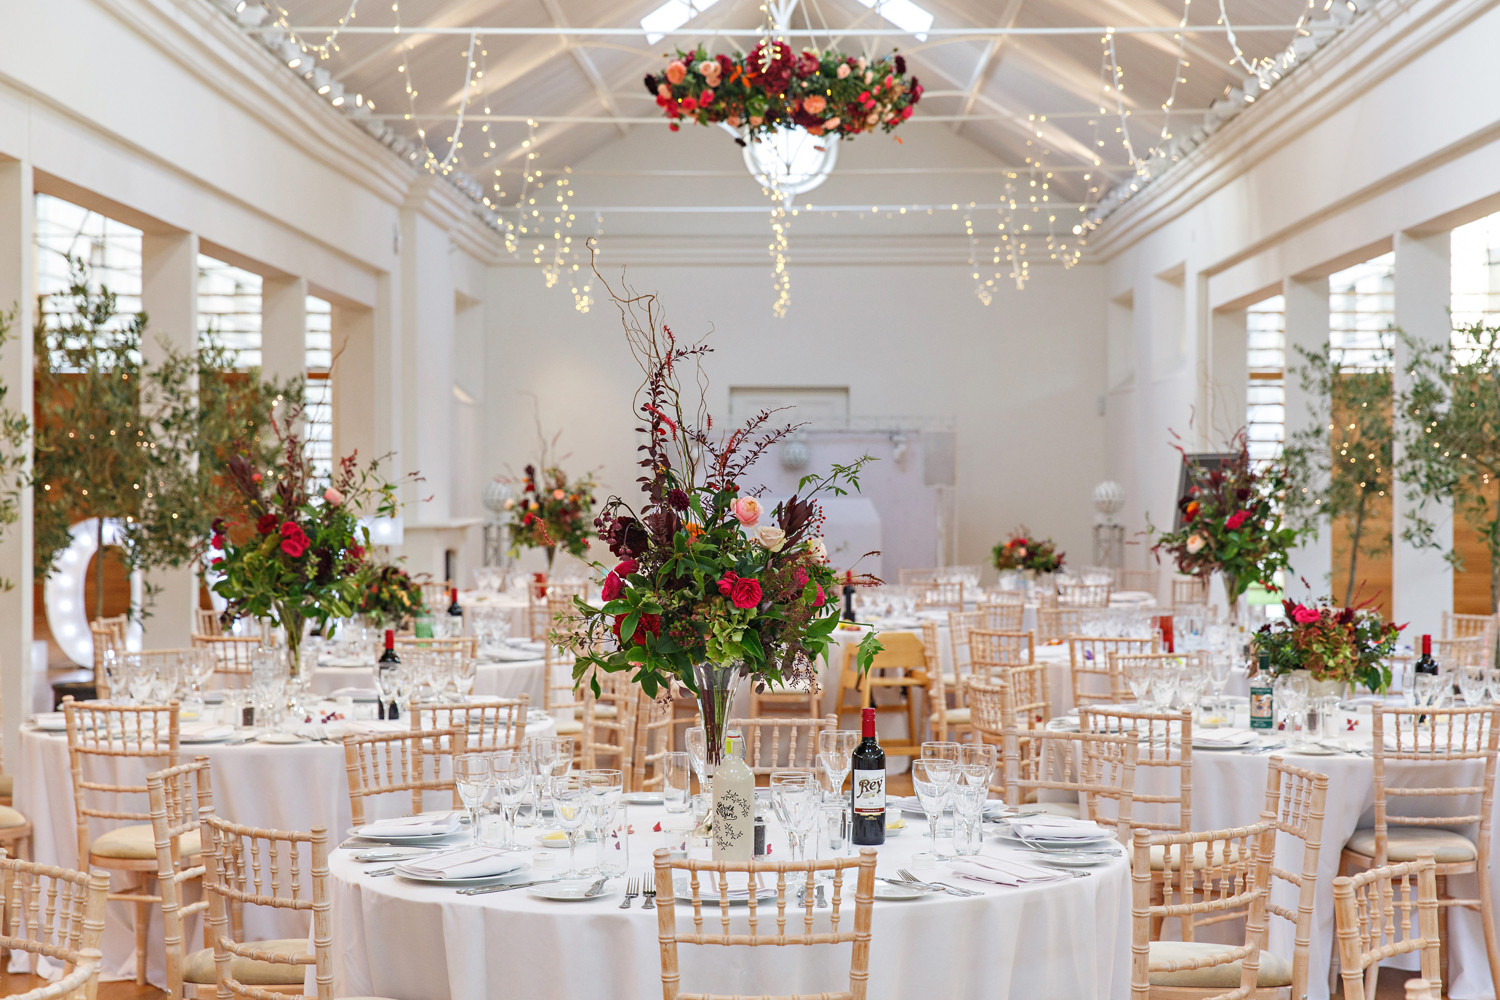 Wedding Venue Themes
 How to Theme Your Wedding to plement Your Venue with